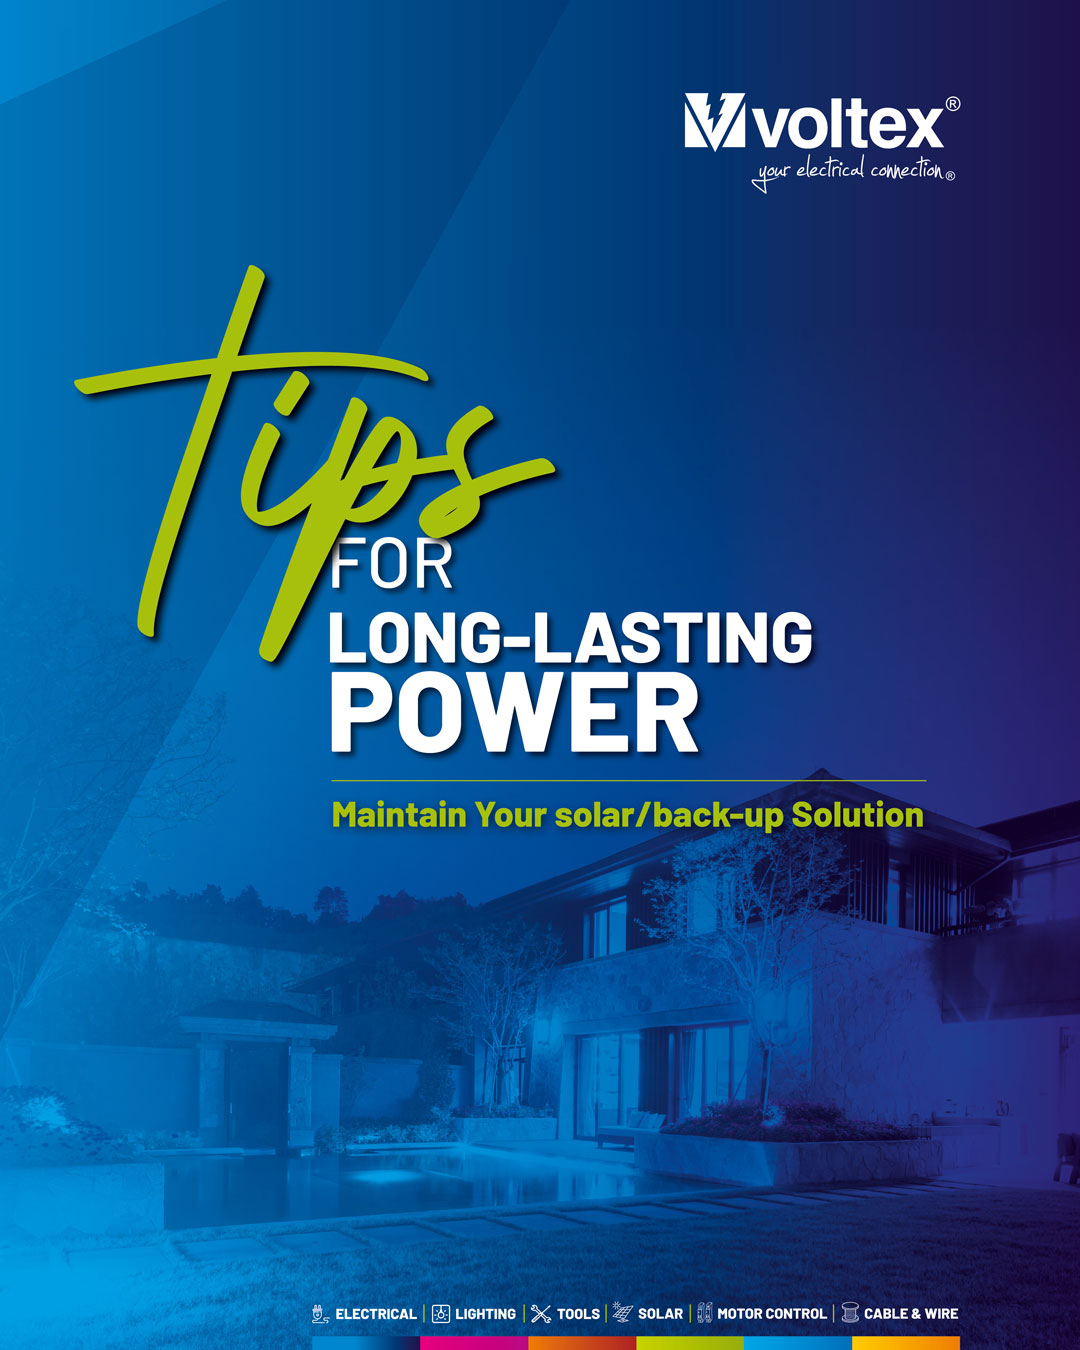 7 Tips to Help Maintain Your Inverter’s Power